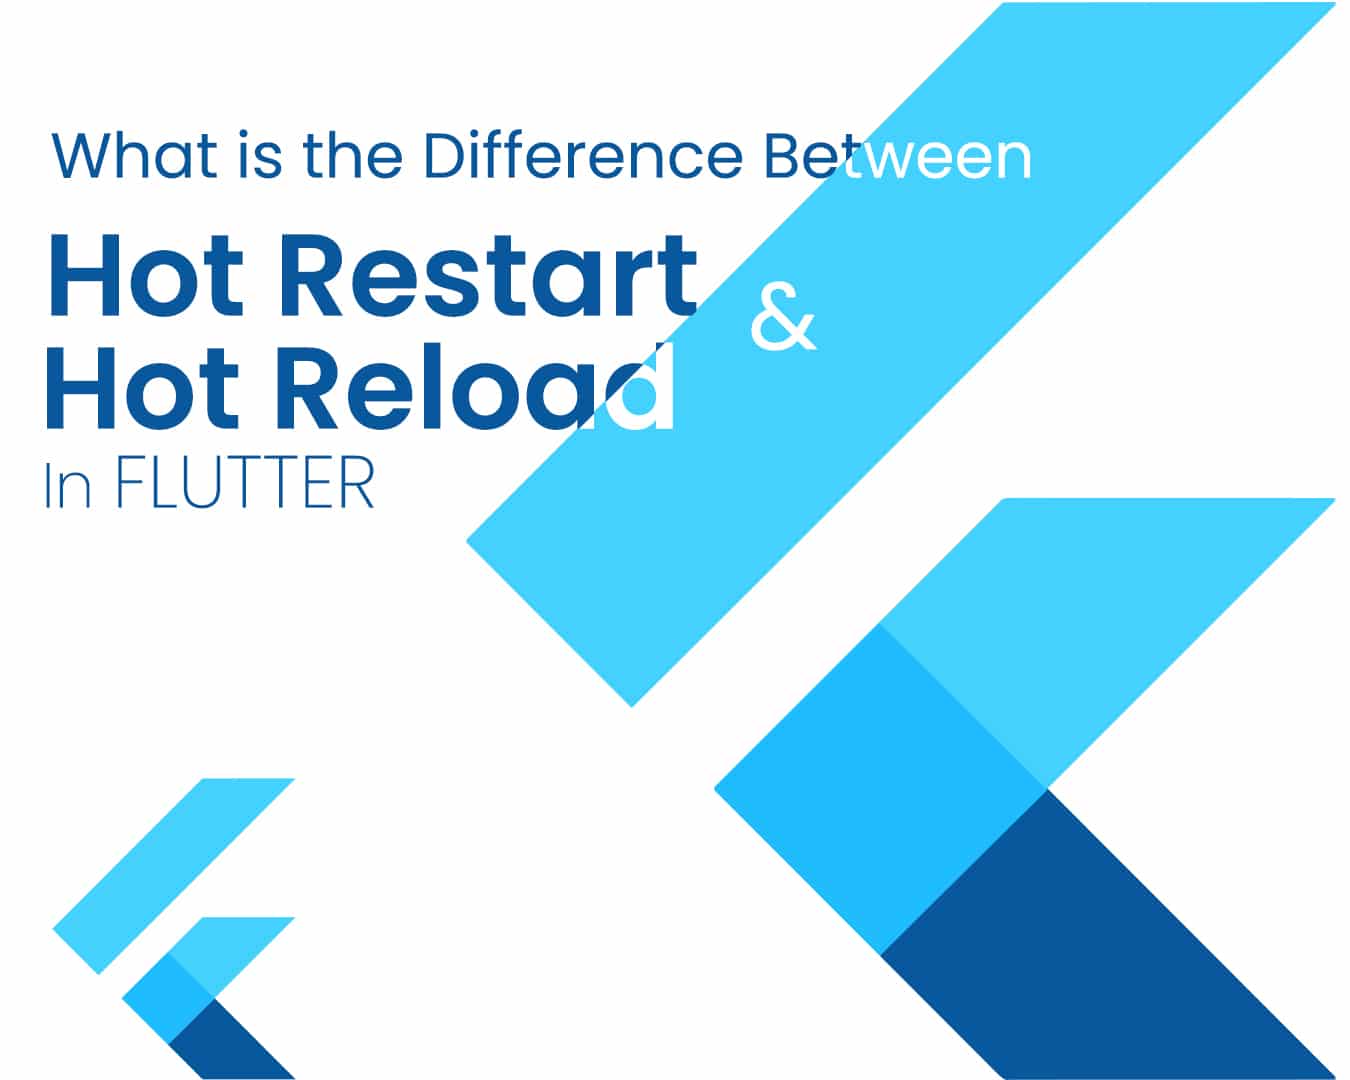 What is the difference between hot restart and hot reload?